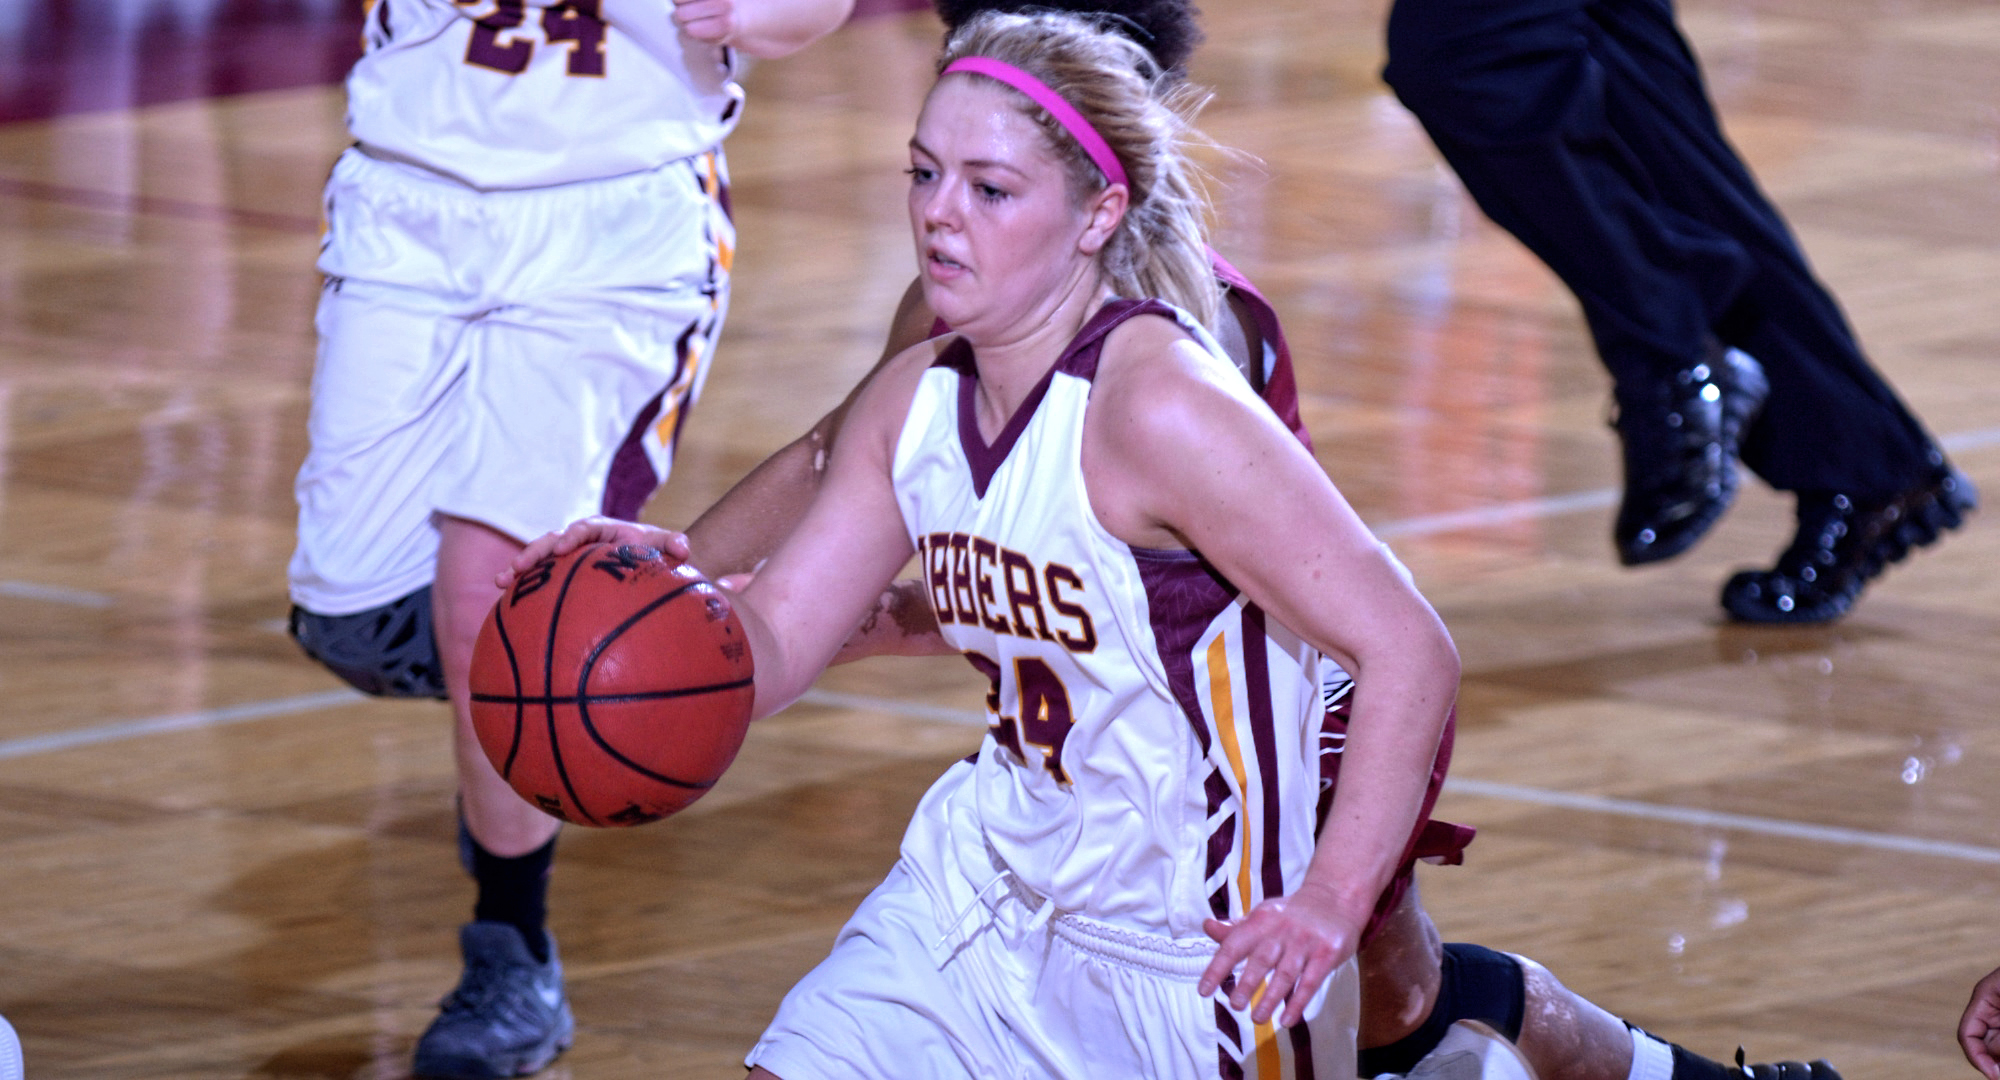 Senior Grace Wolhowe averaged 17.5 ppg in the Cobbers' first two games in Michigan.